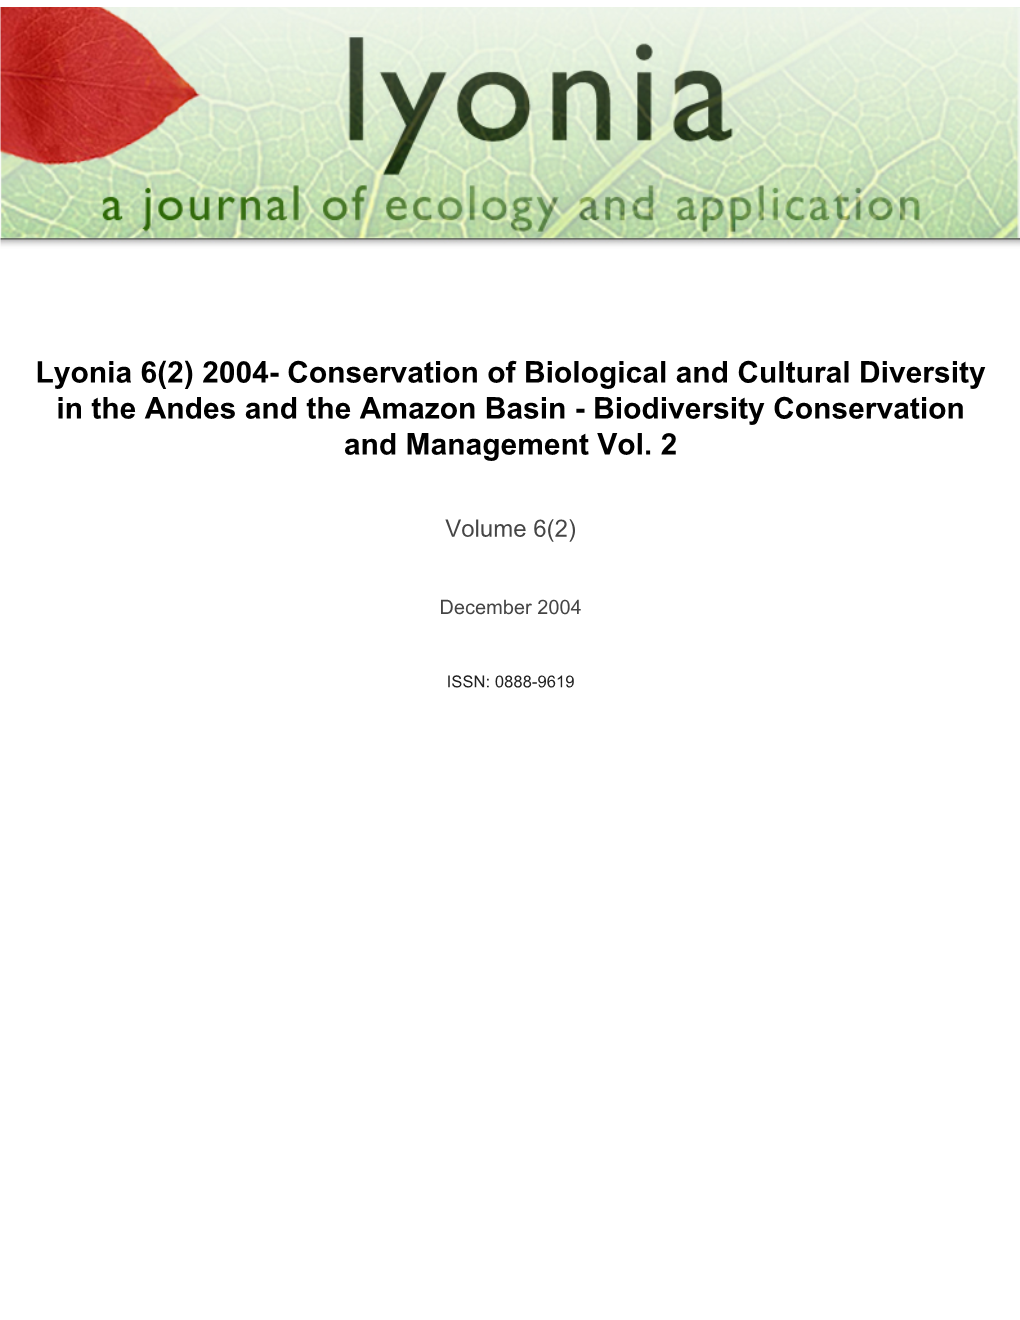 Conservation of Biological and Cultural Diversity in the Andes and the Amazon Basin - Biodiversity Conservation and Management Vol